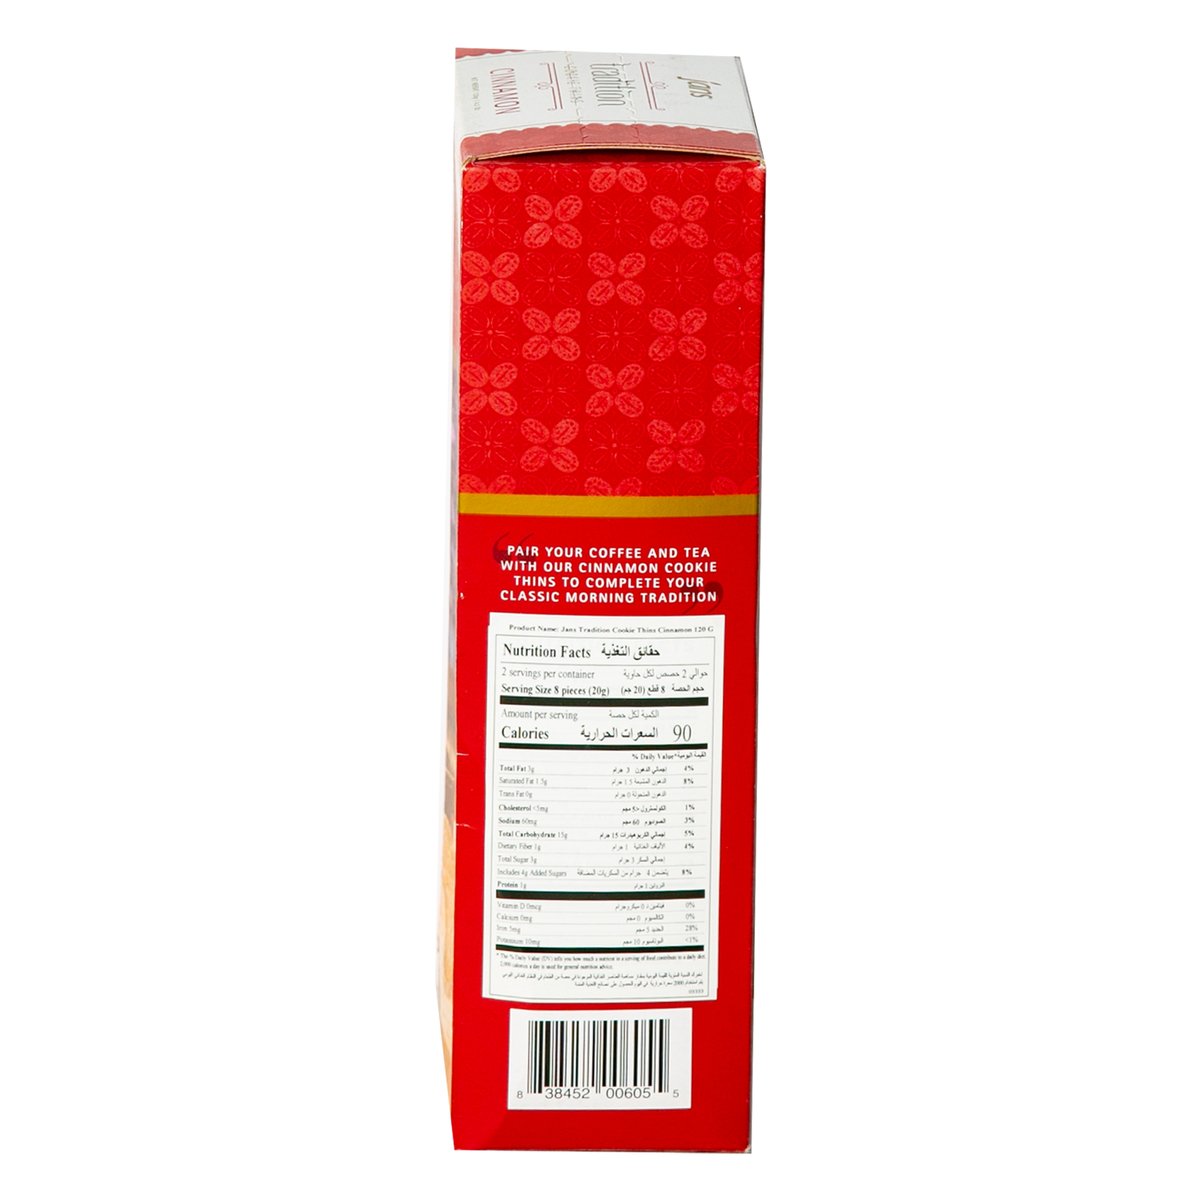 Jans Tradition Cookie Thins Cinnamon 120 g